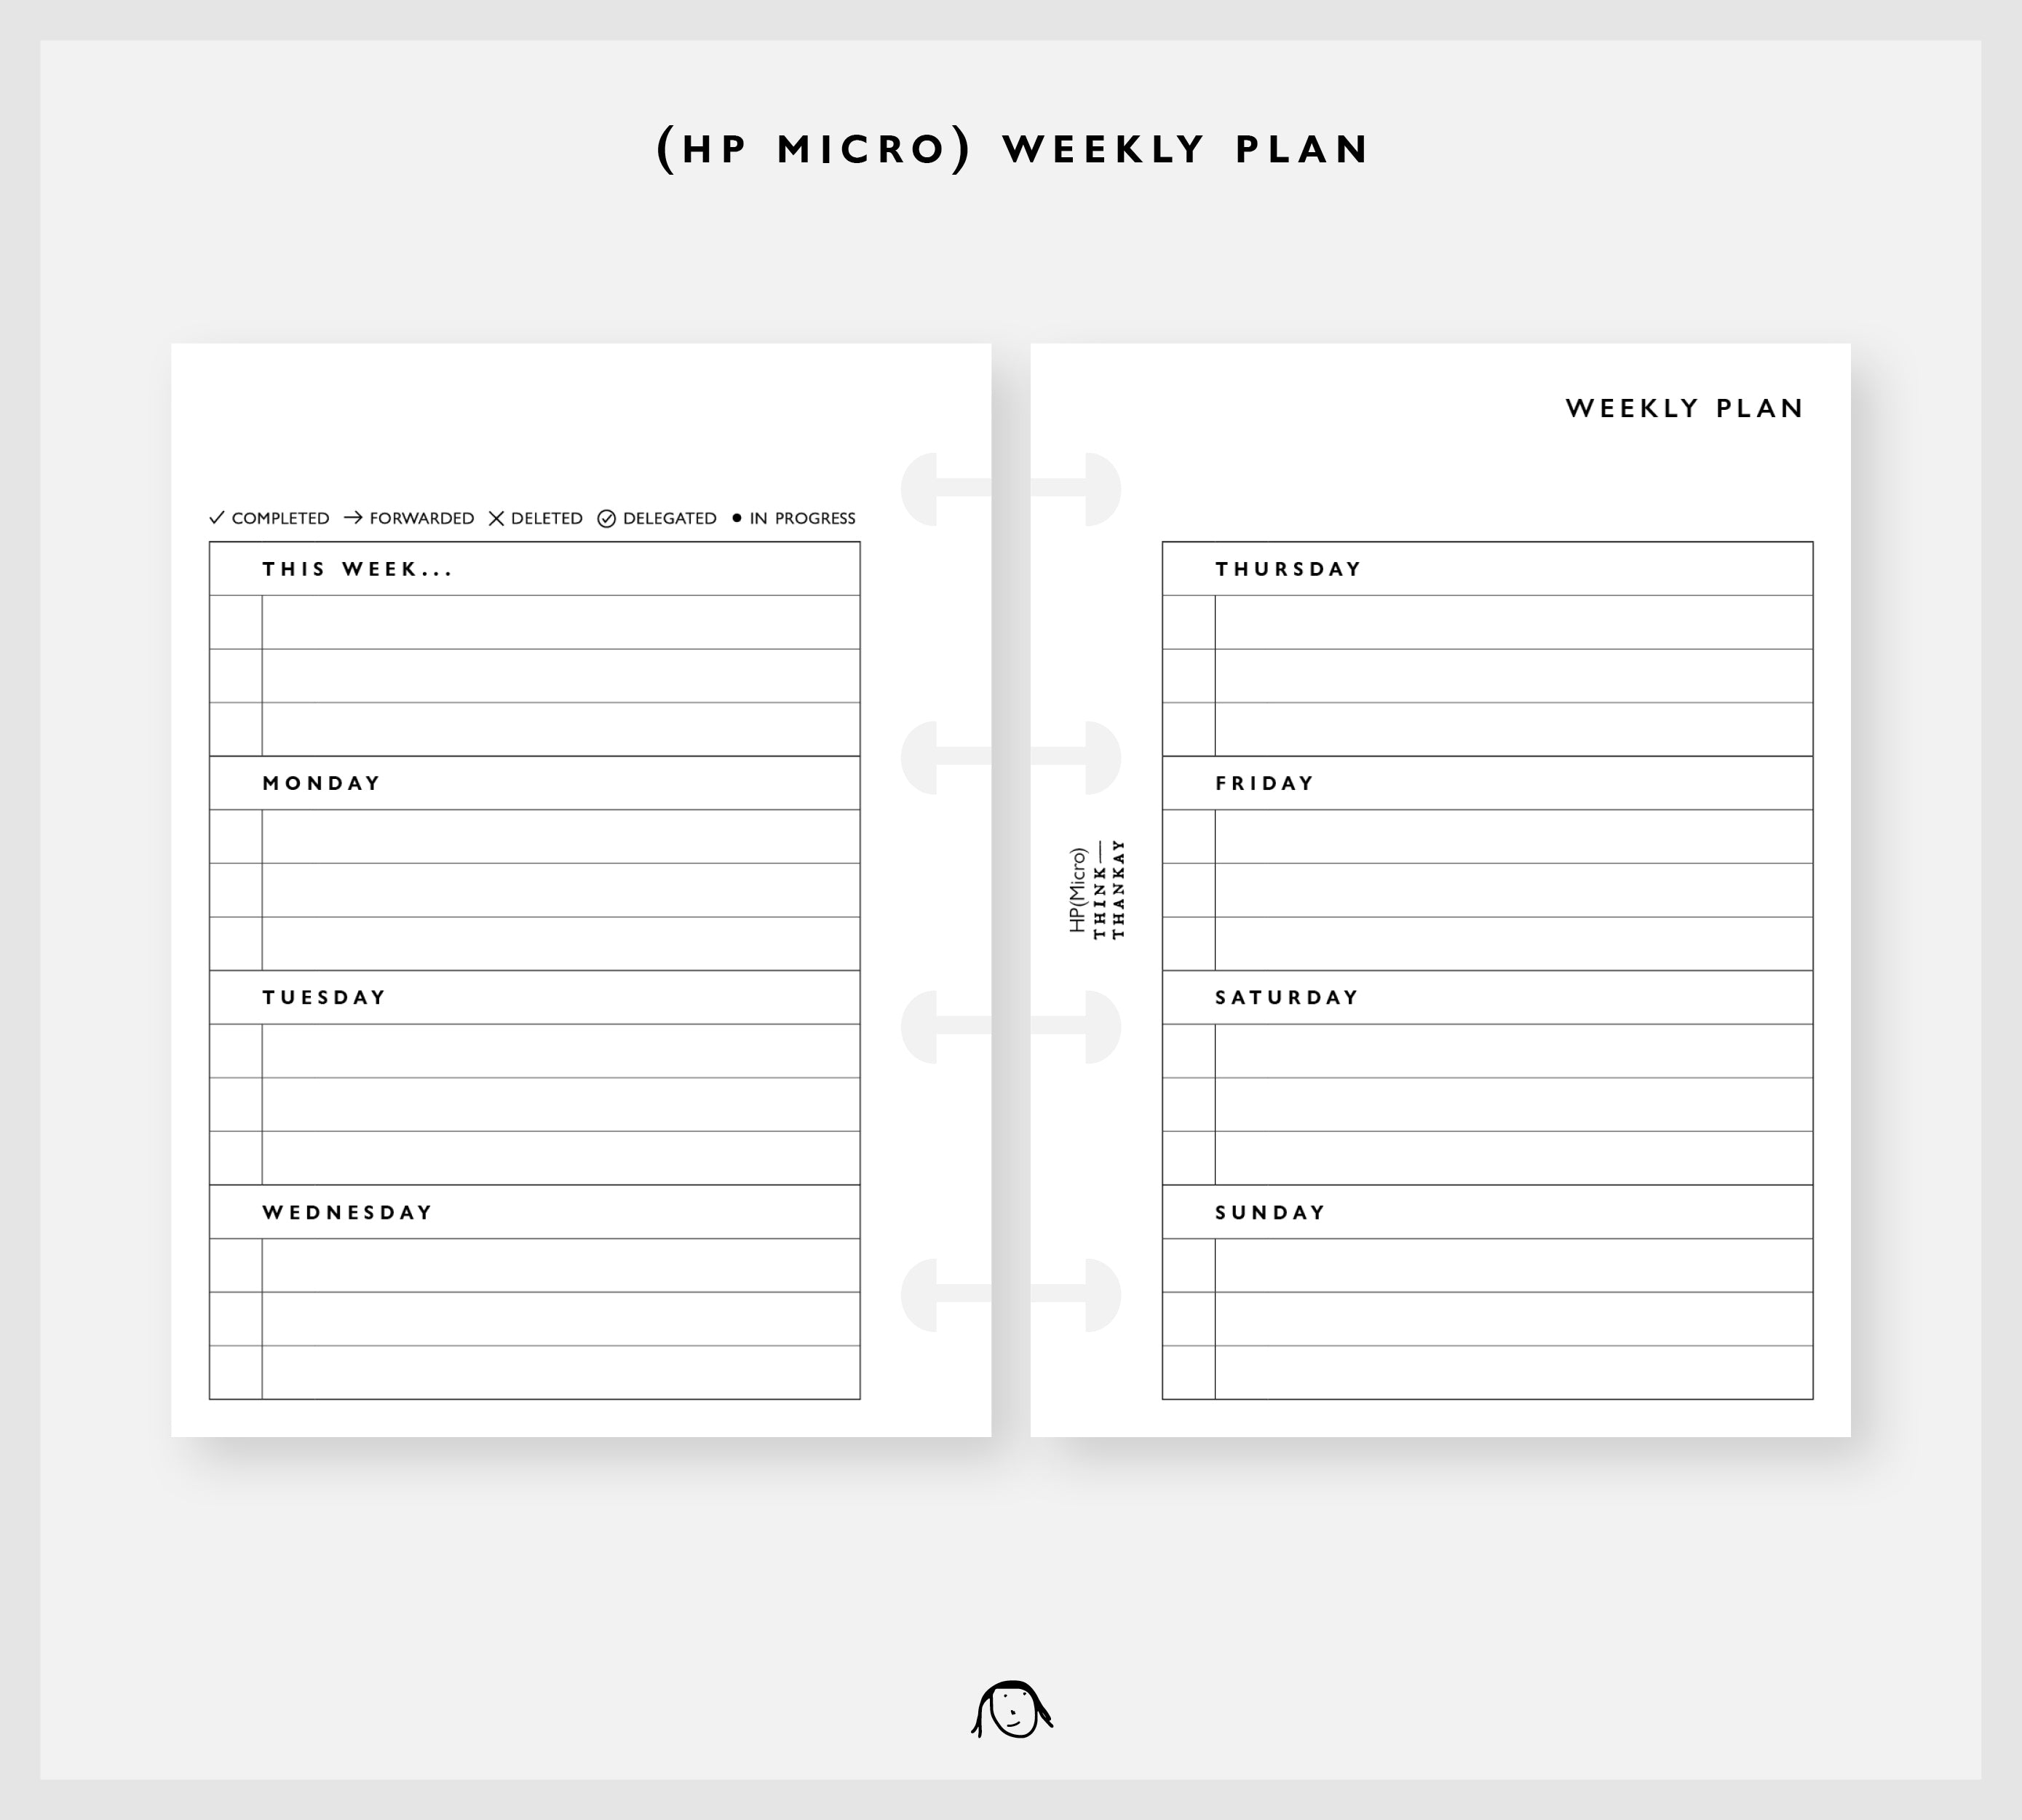 W1: Weekly